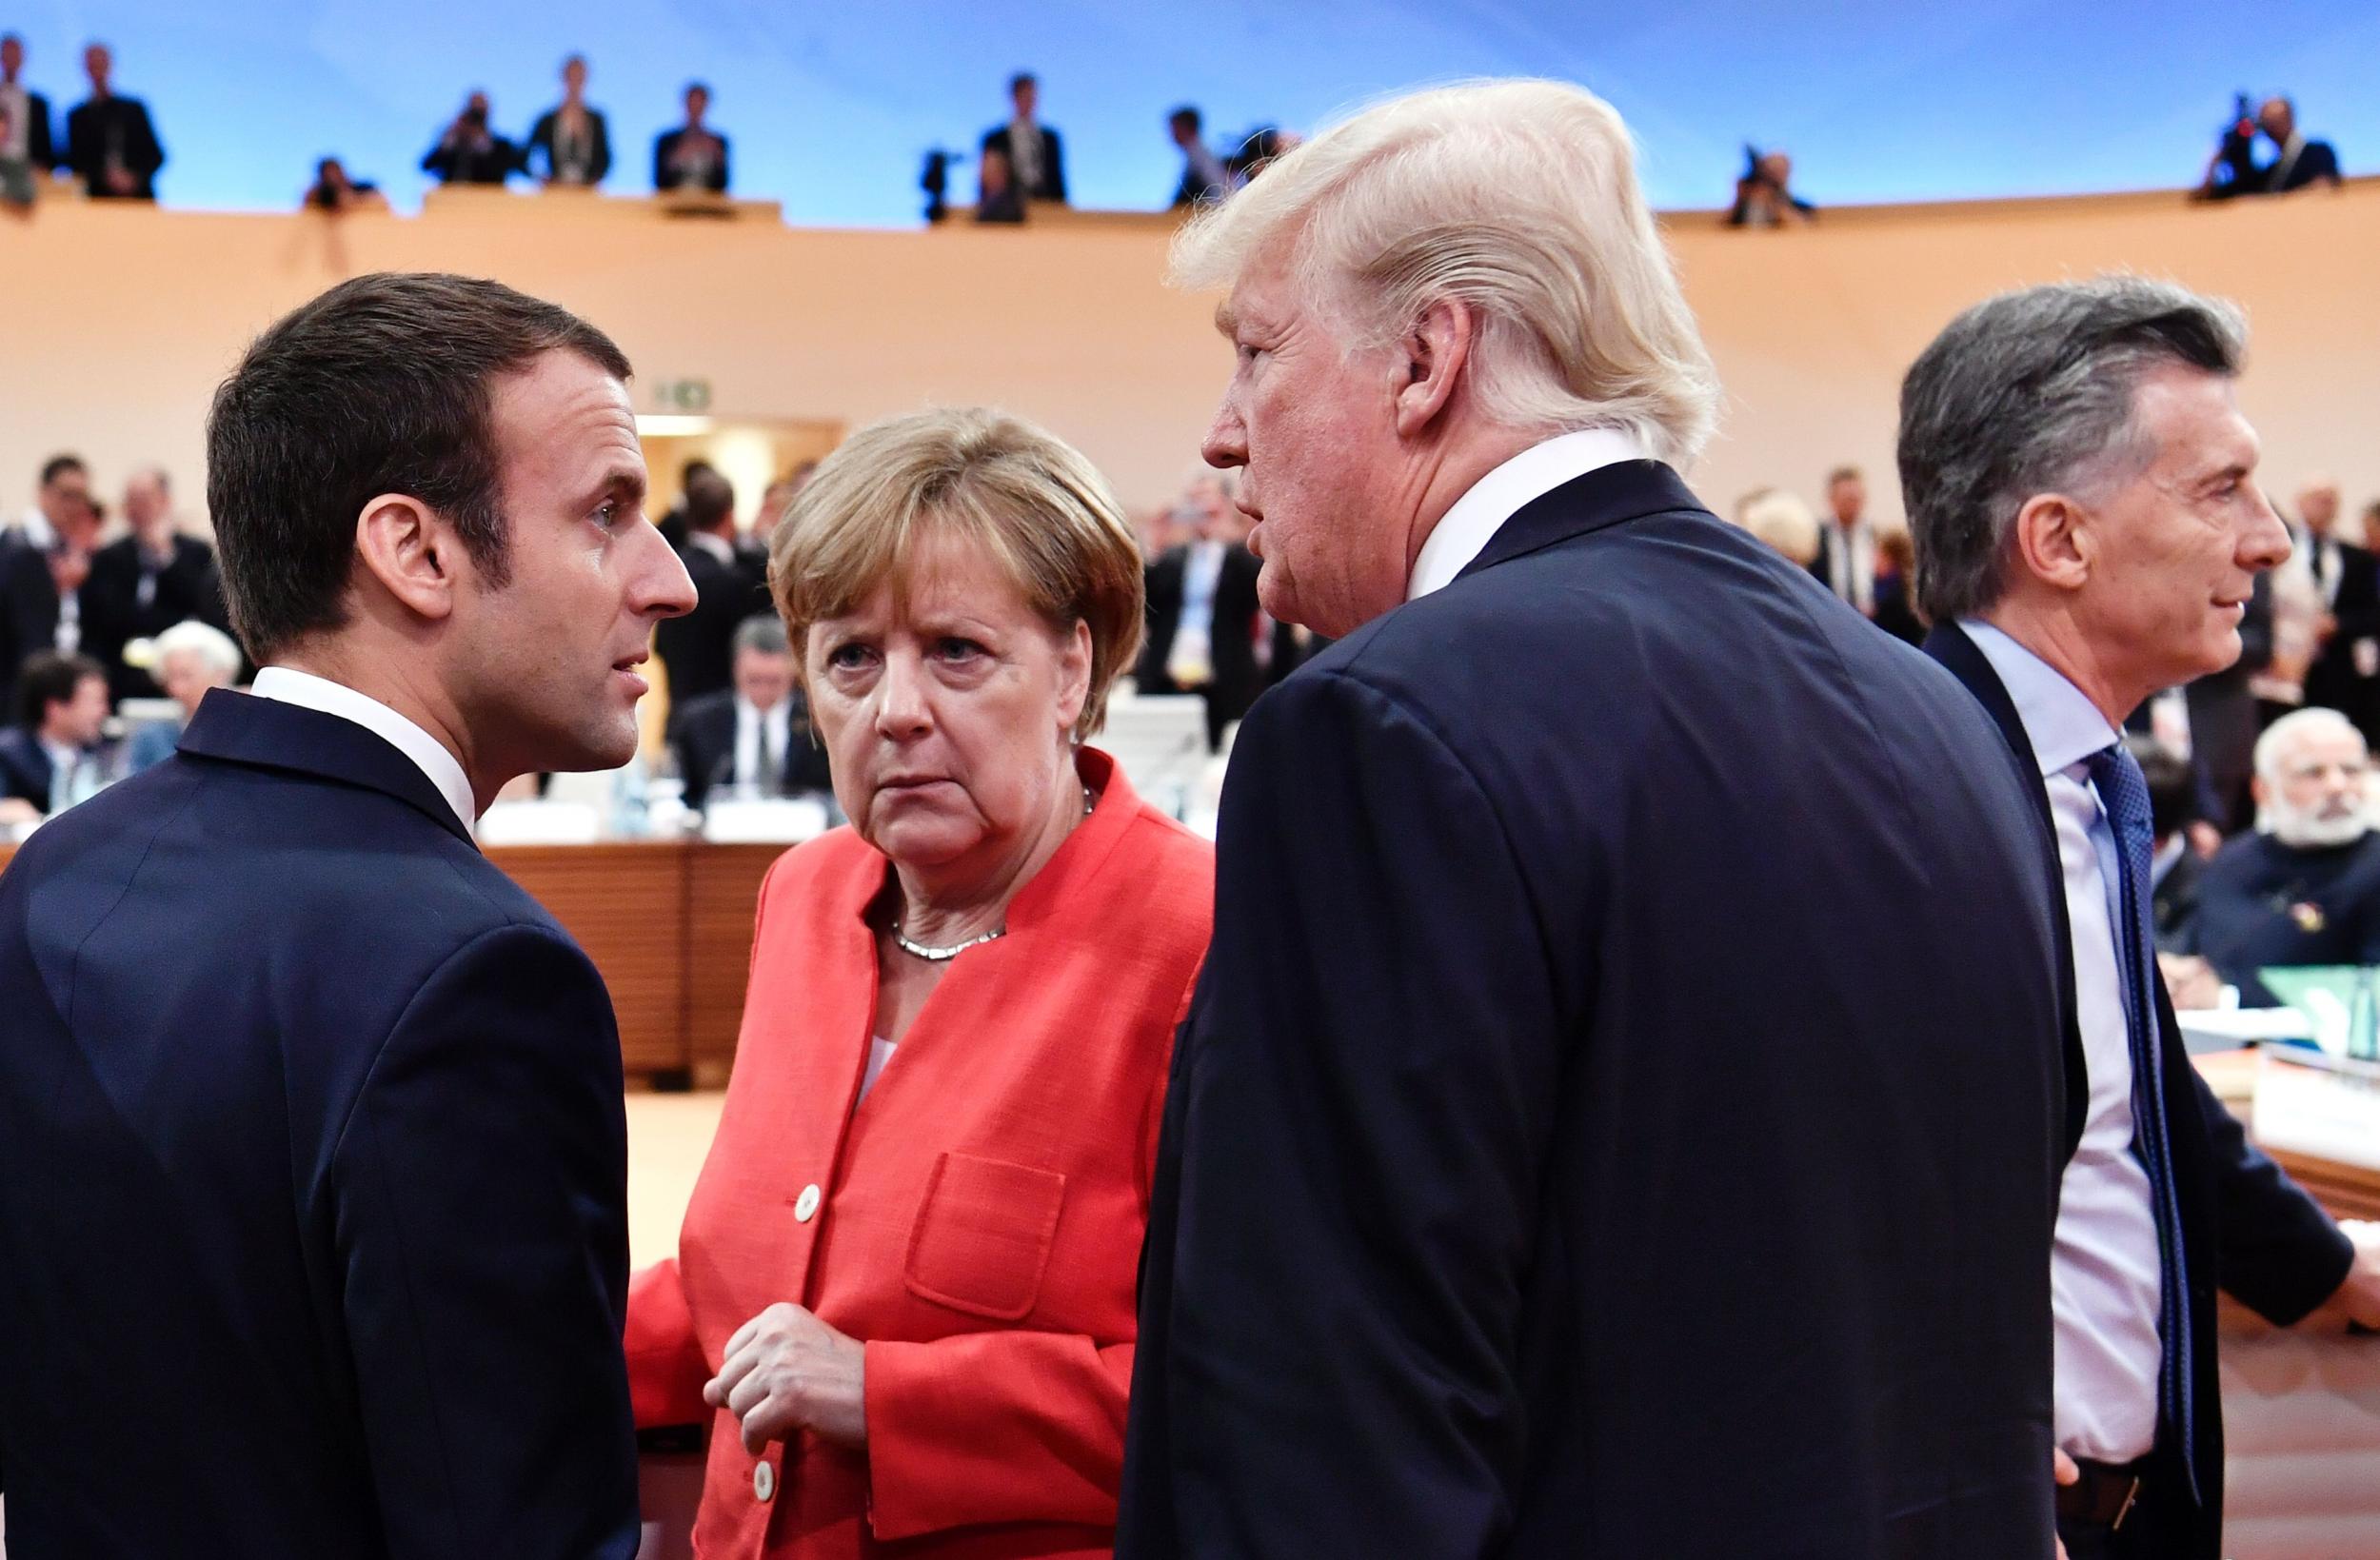 Mr Macron jumped through world leaders to stand next to Mr Trump